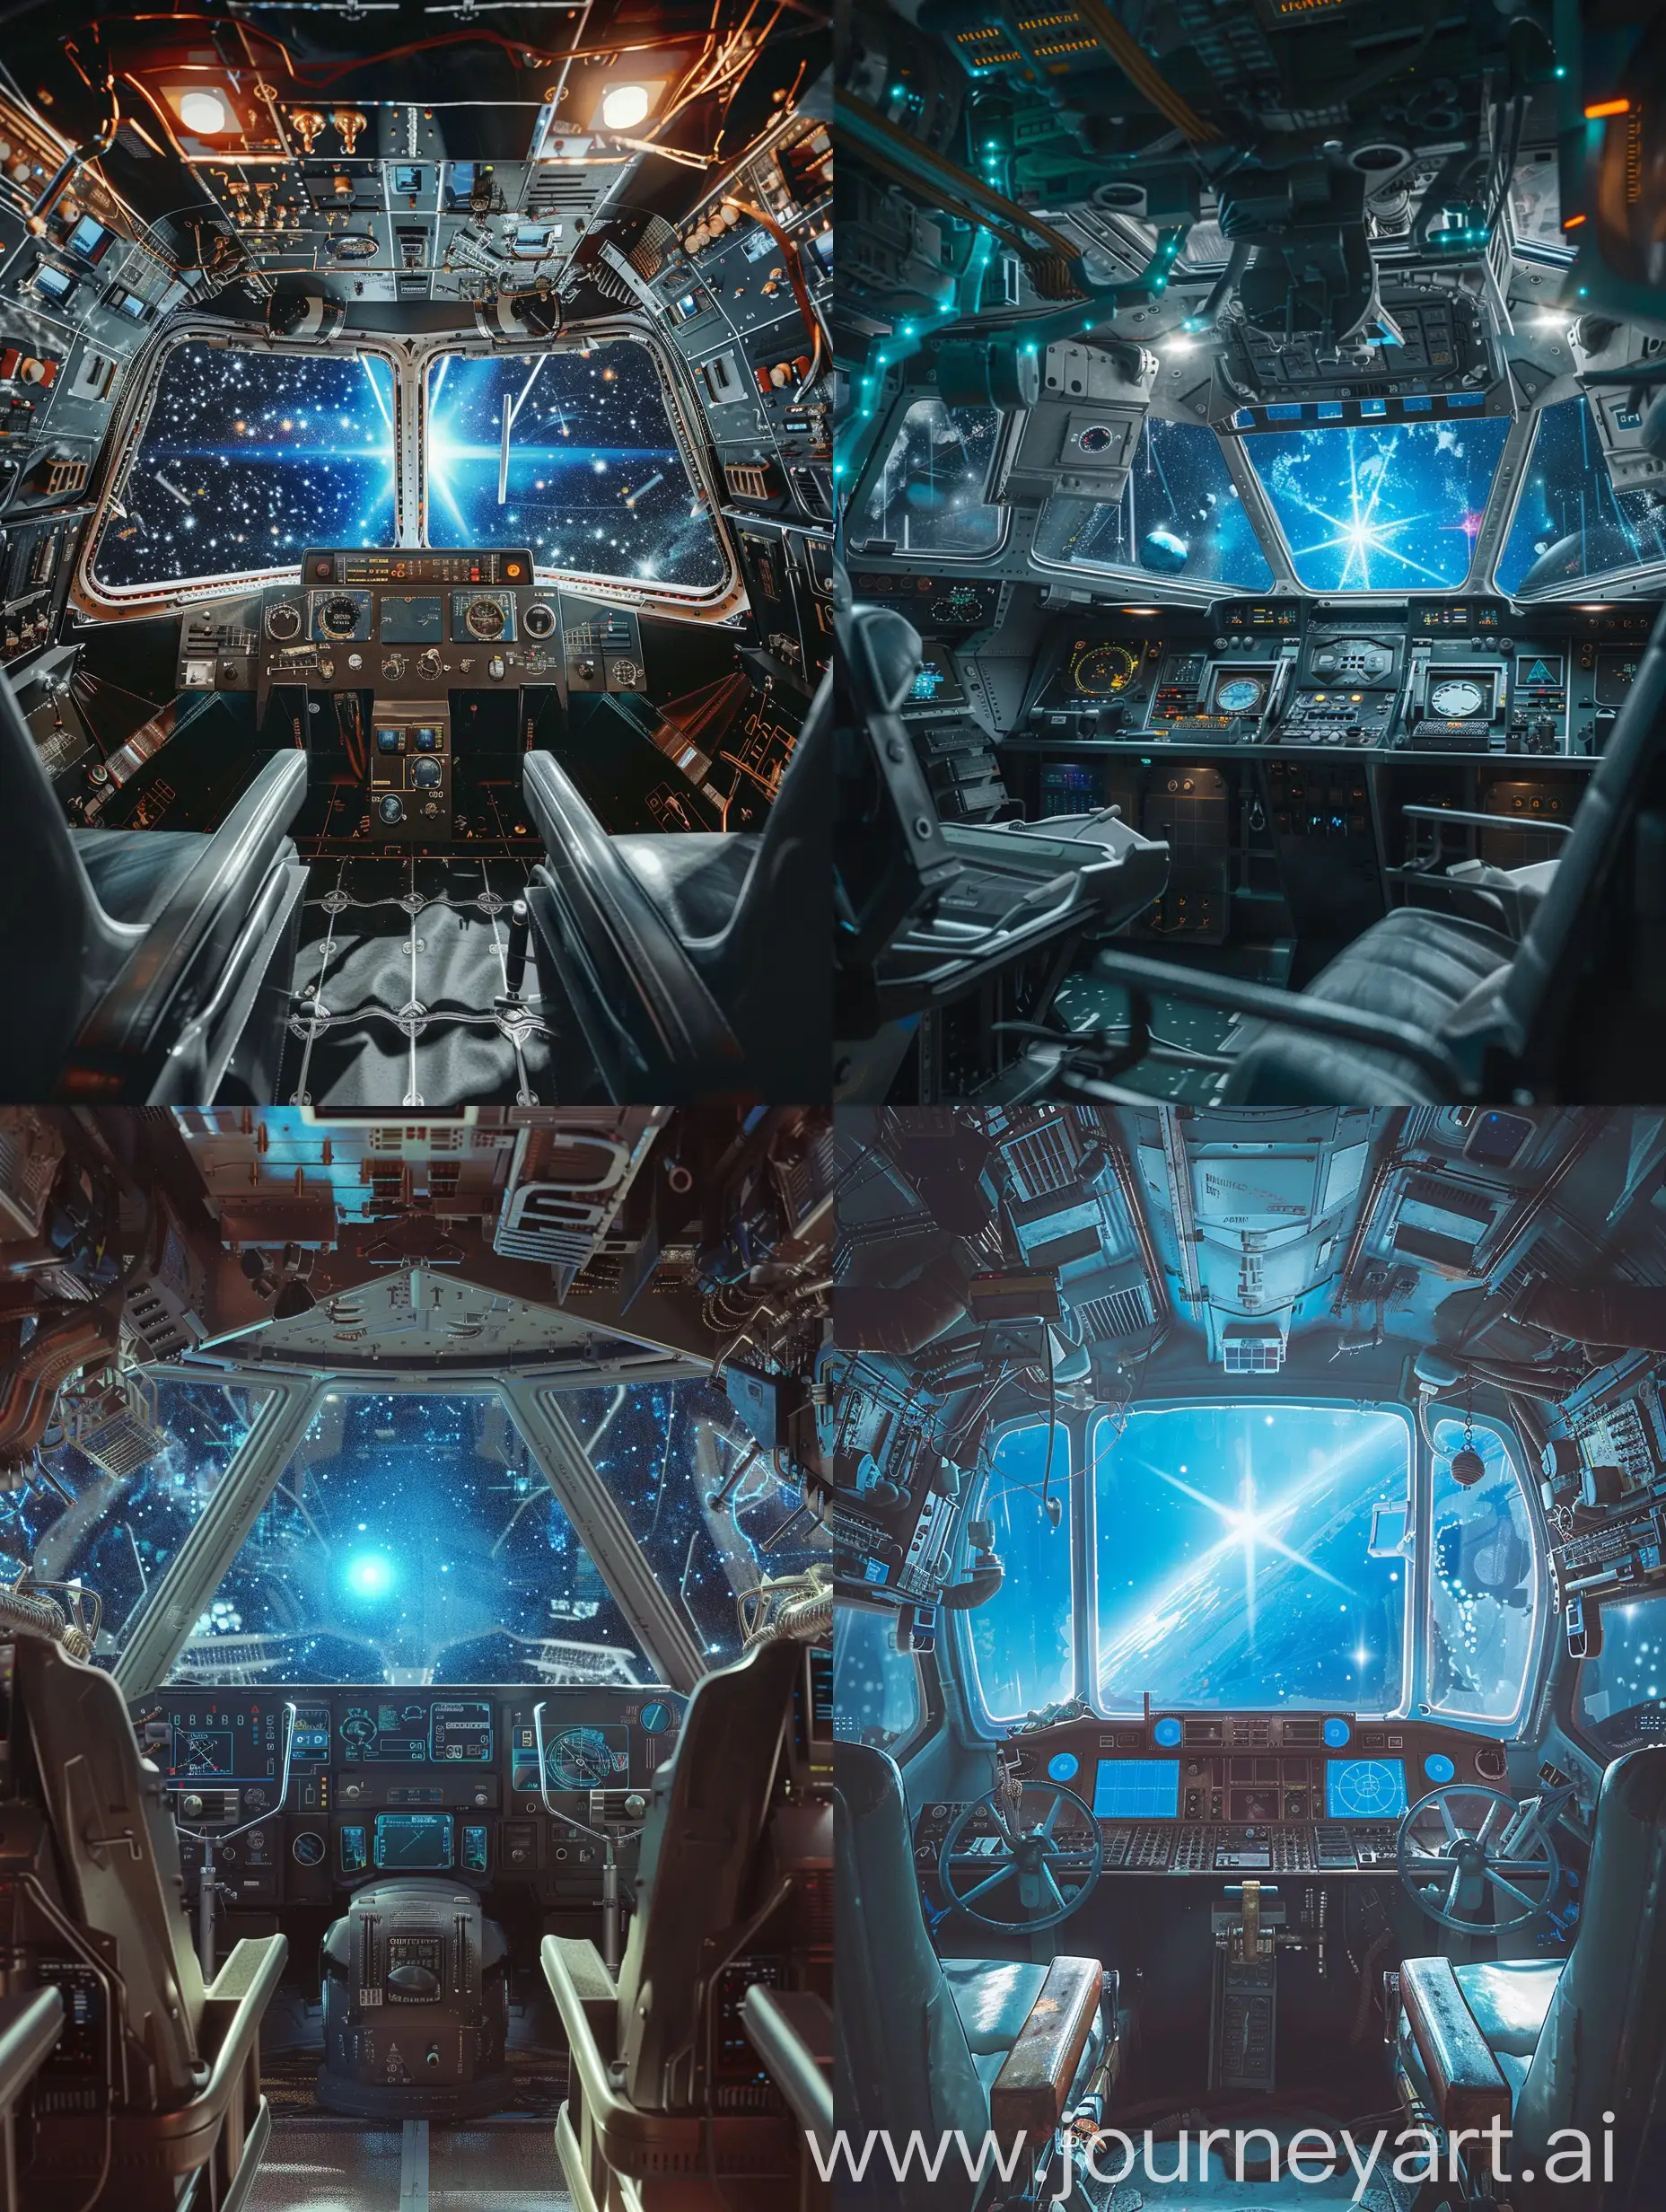 Retrofuturistic-Spaceship-Cabin-with-Clear-Darkness-and-Giant-Blue-Star-View